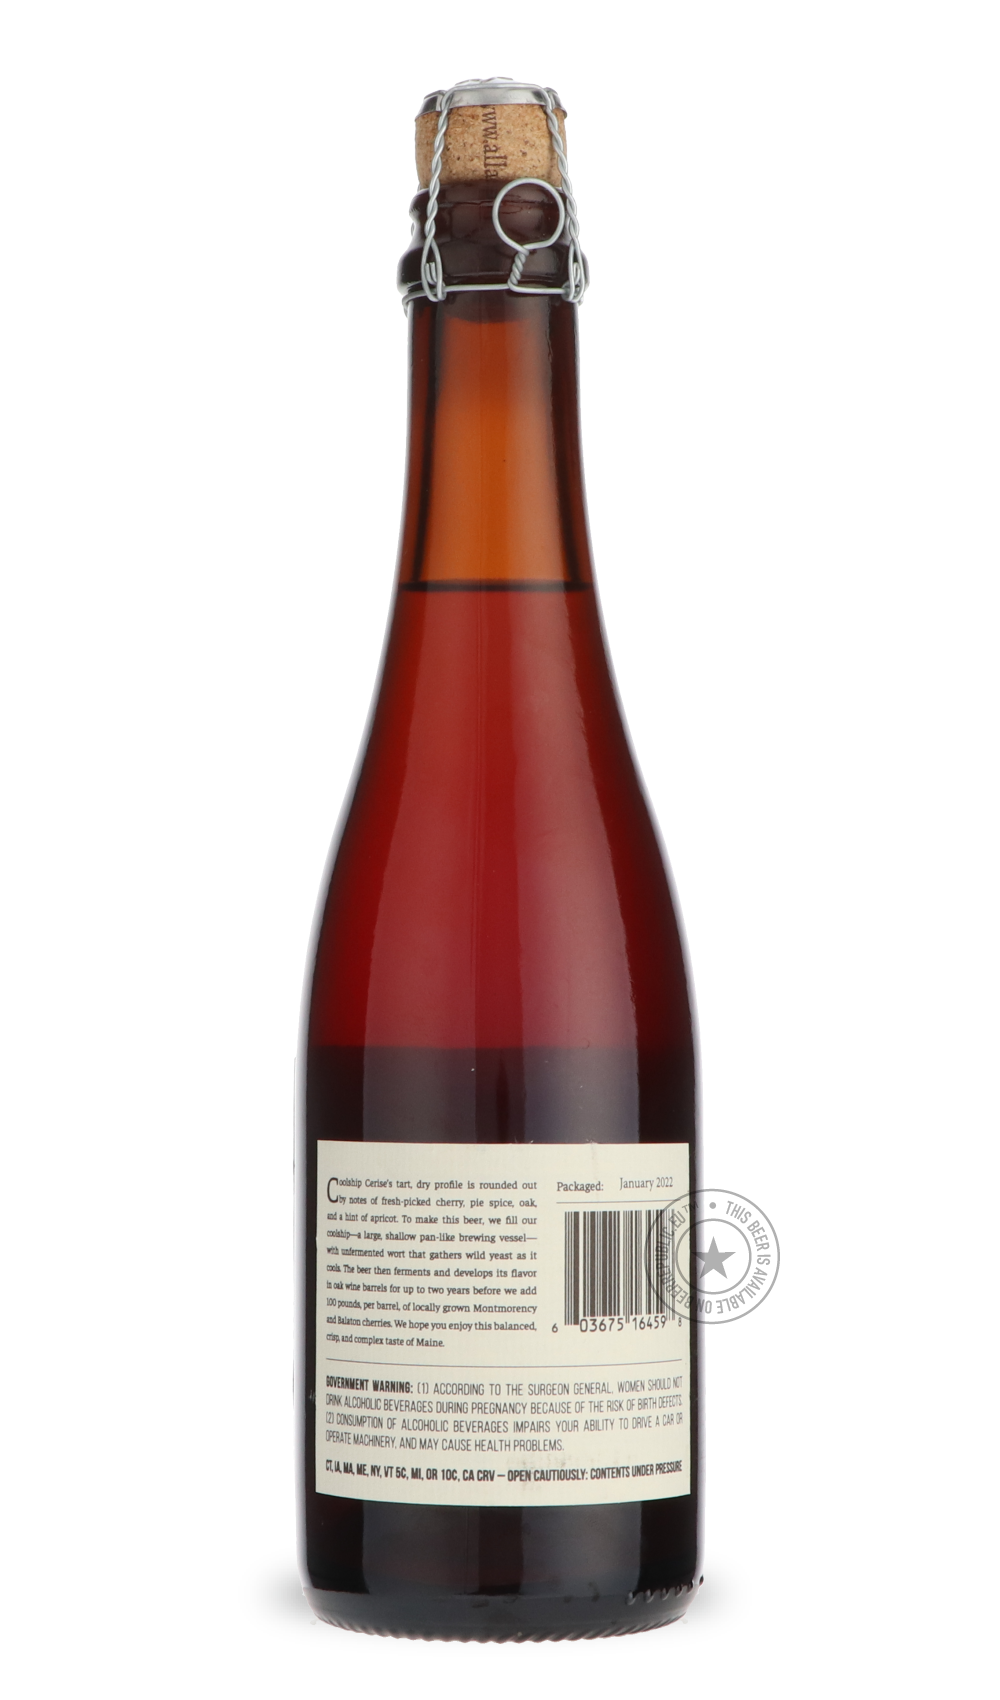 -Allagash- Coolship Cerise-Sour / Wild & Fruity- Only @ Beer Republic - The best online beer store for American & Canadian craft beer - Buy beer online from the USA and Canada - Bier online kopen - Amerikaans bier kopen - Craft beer store - Craft beer kopen - Amerikanisch bier kaufen - Bier online kaufen - Acheter biere online - IPA - Stout - Porter - New England IPA - Hazy IPA - Imperial Stout - Barrel Aged - Barrel Aged Imperial Stout - Brown - Dark beer - Blond - Blonde - Pilsner - Lager - Wheat - Weizen